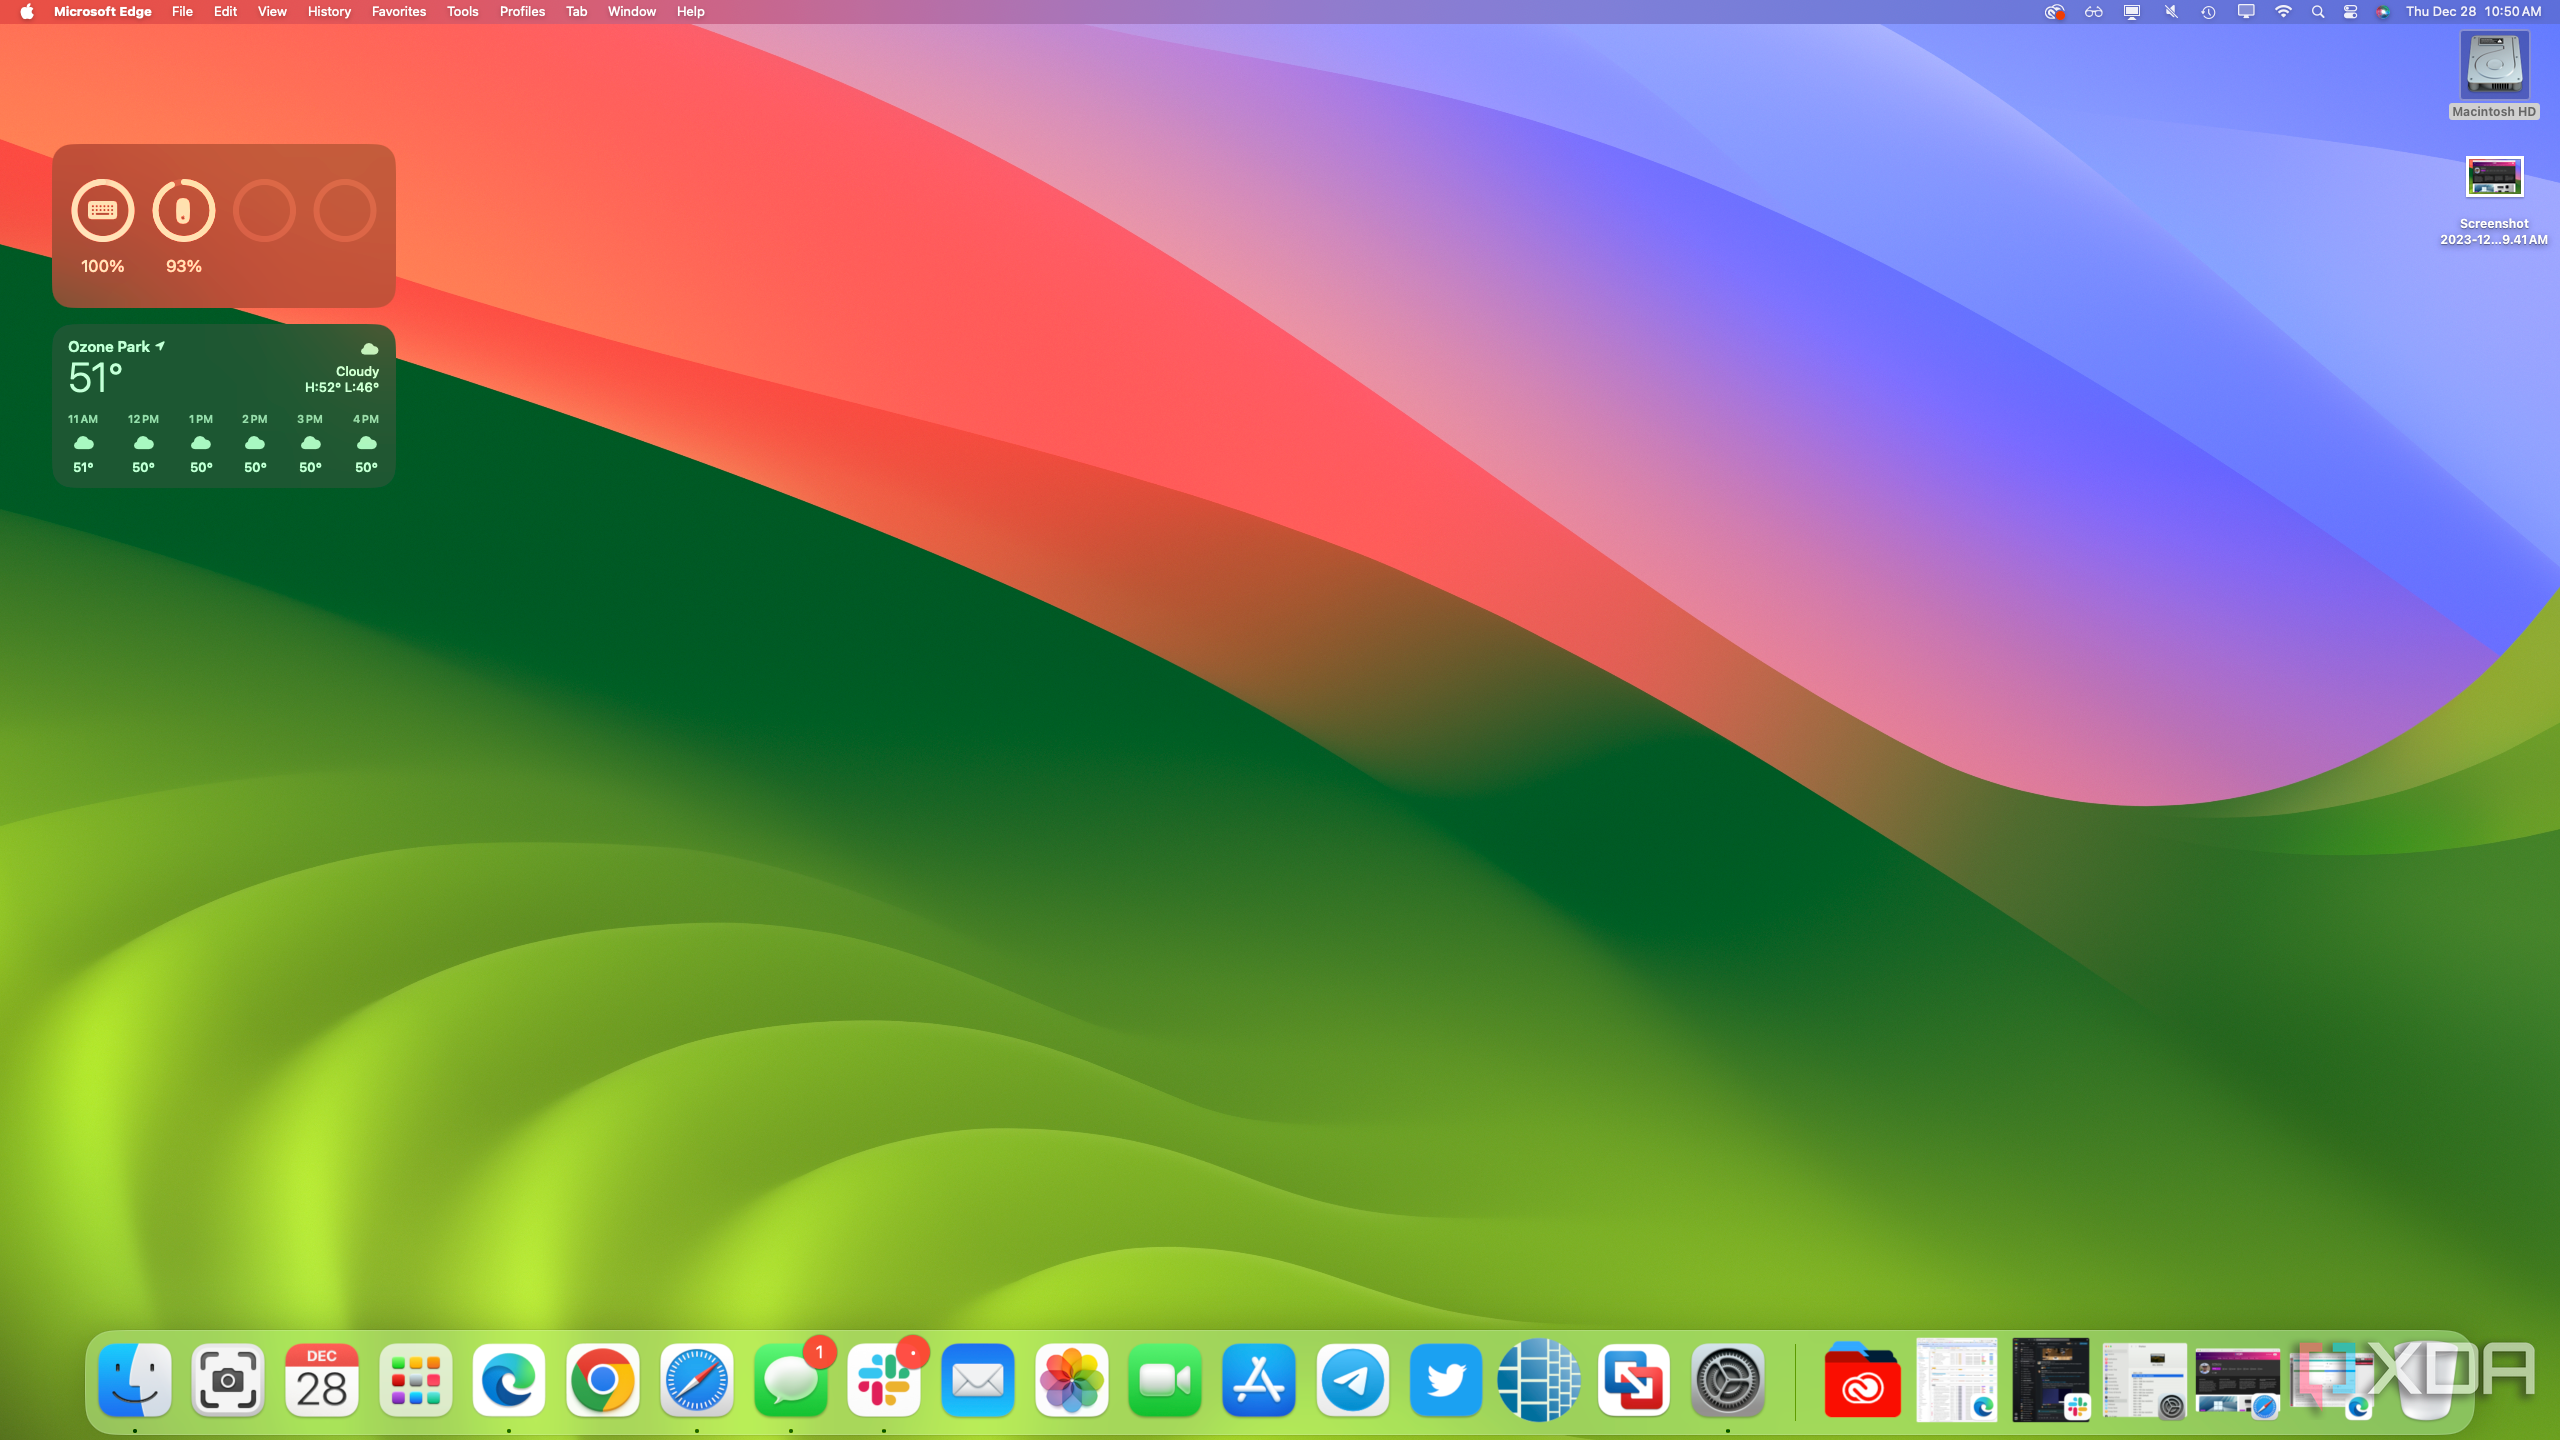 A screenshot of the macOS desktop showing a few applications pinned to the dock